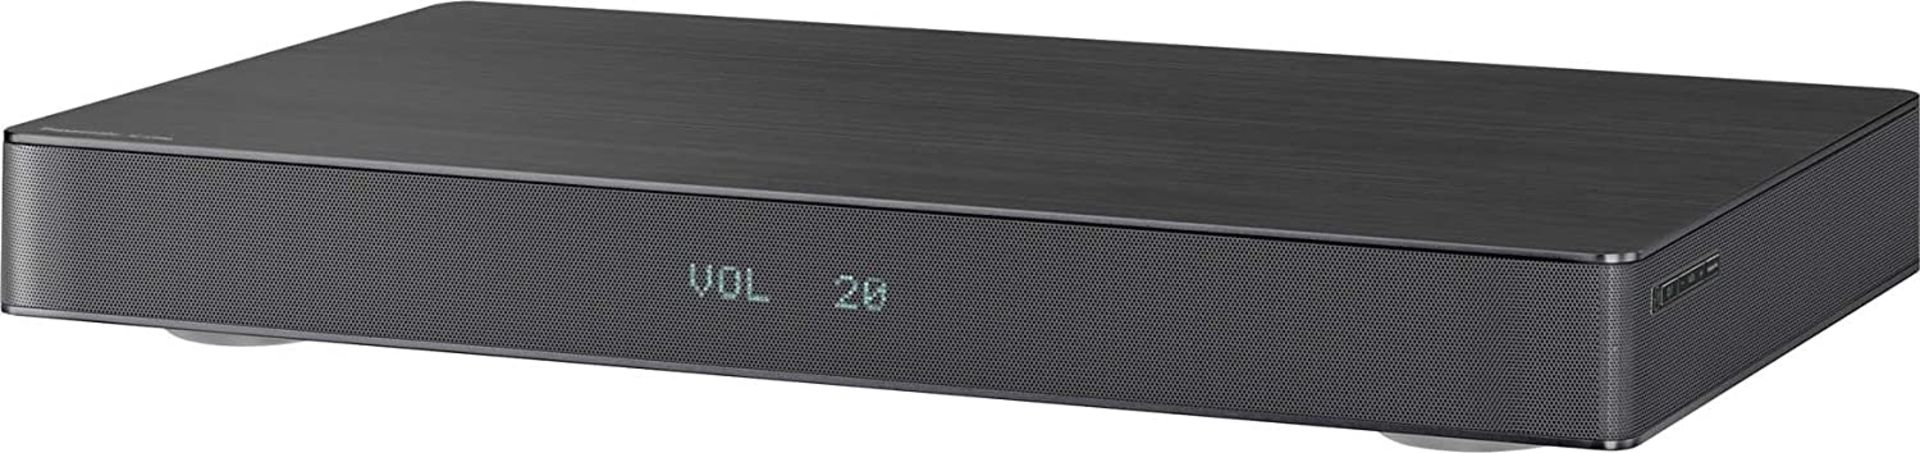 (29) 1 x Grade B - Panasonic SC-HTE80. Home Theater Audio System. Black with Bluetooth, HDMI, O... - Image 3 of 3